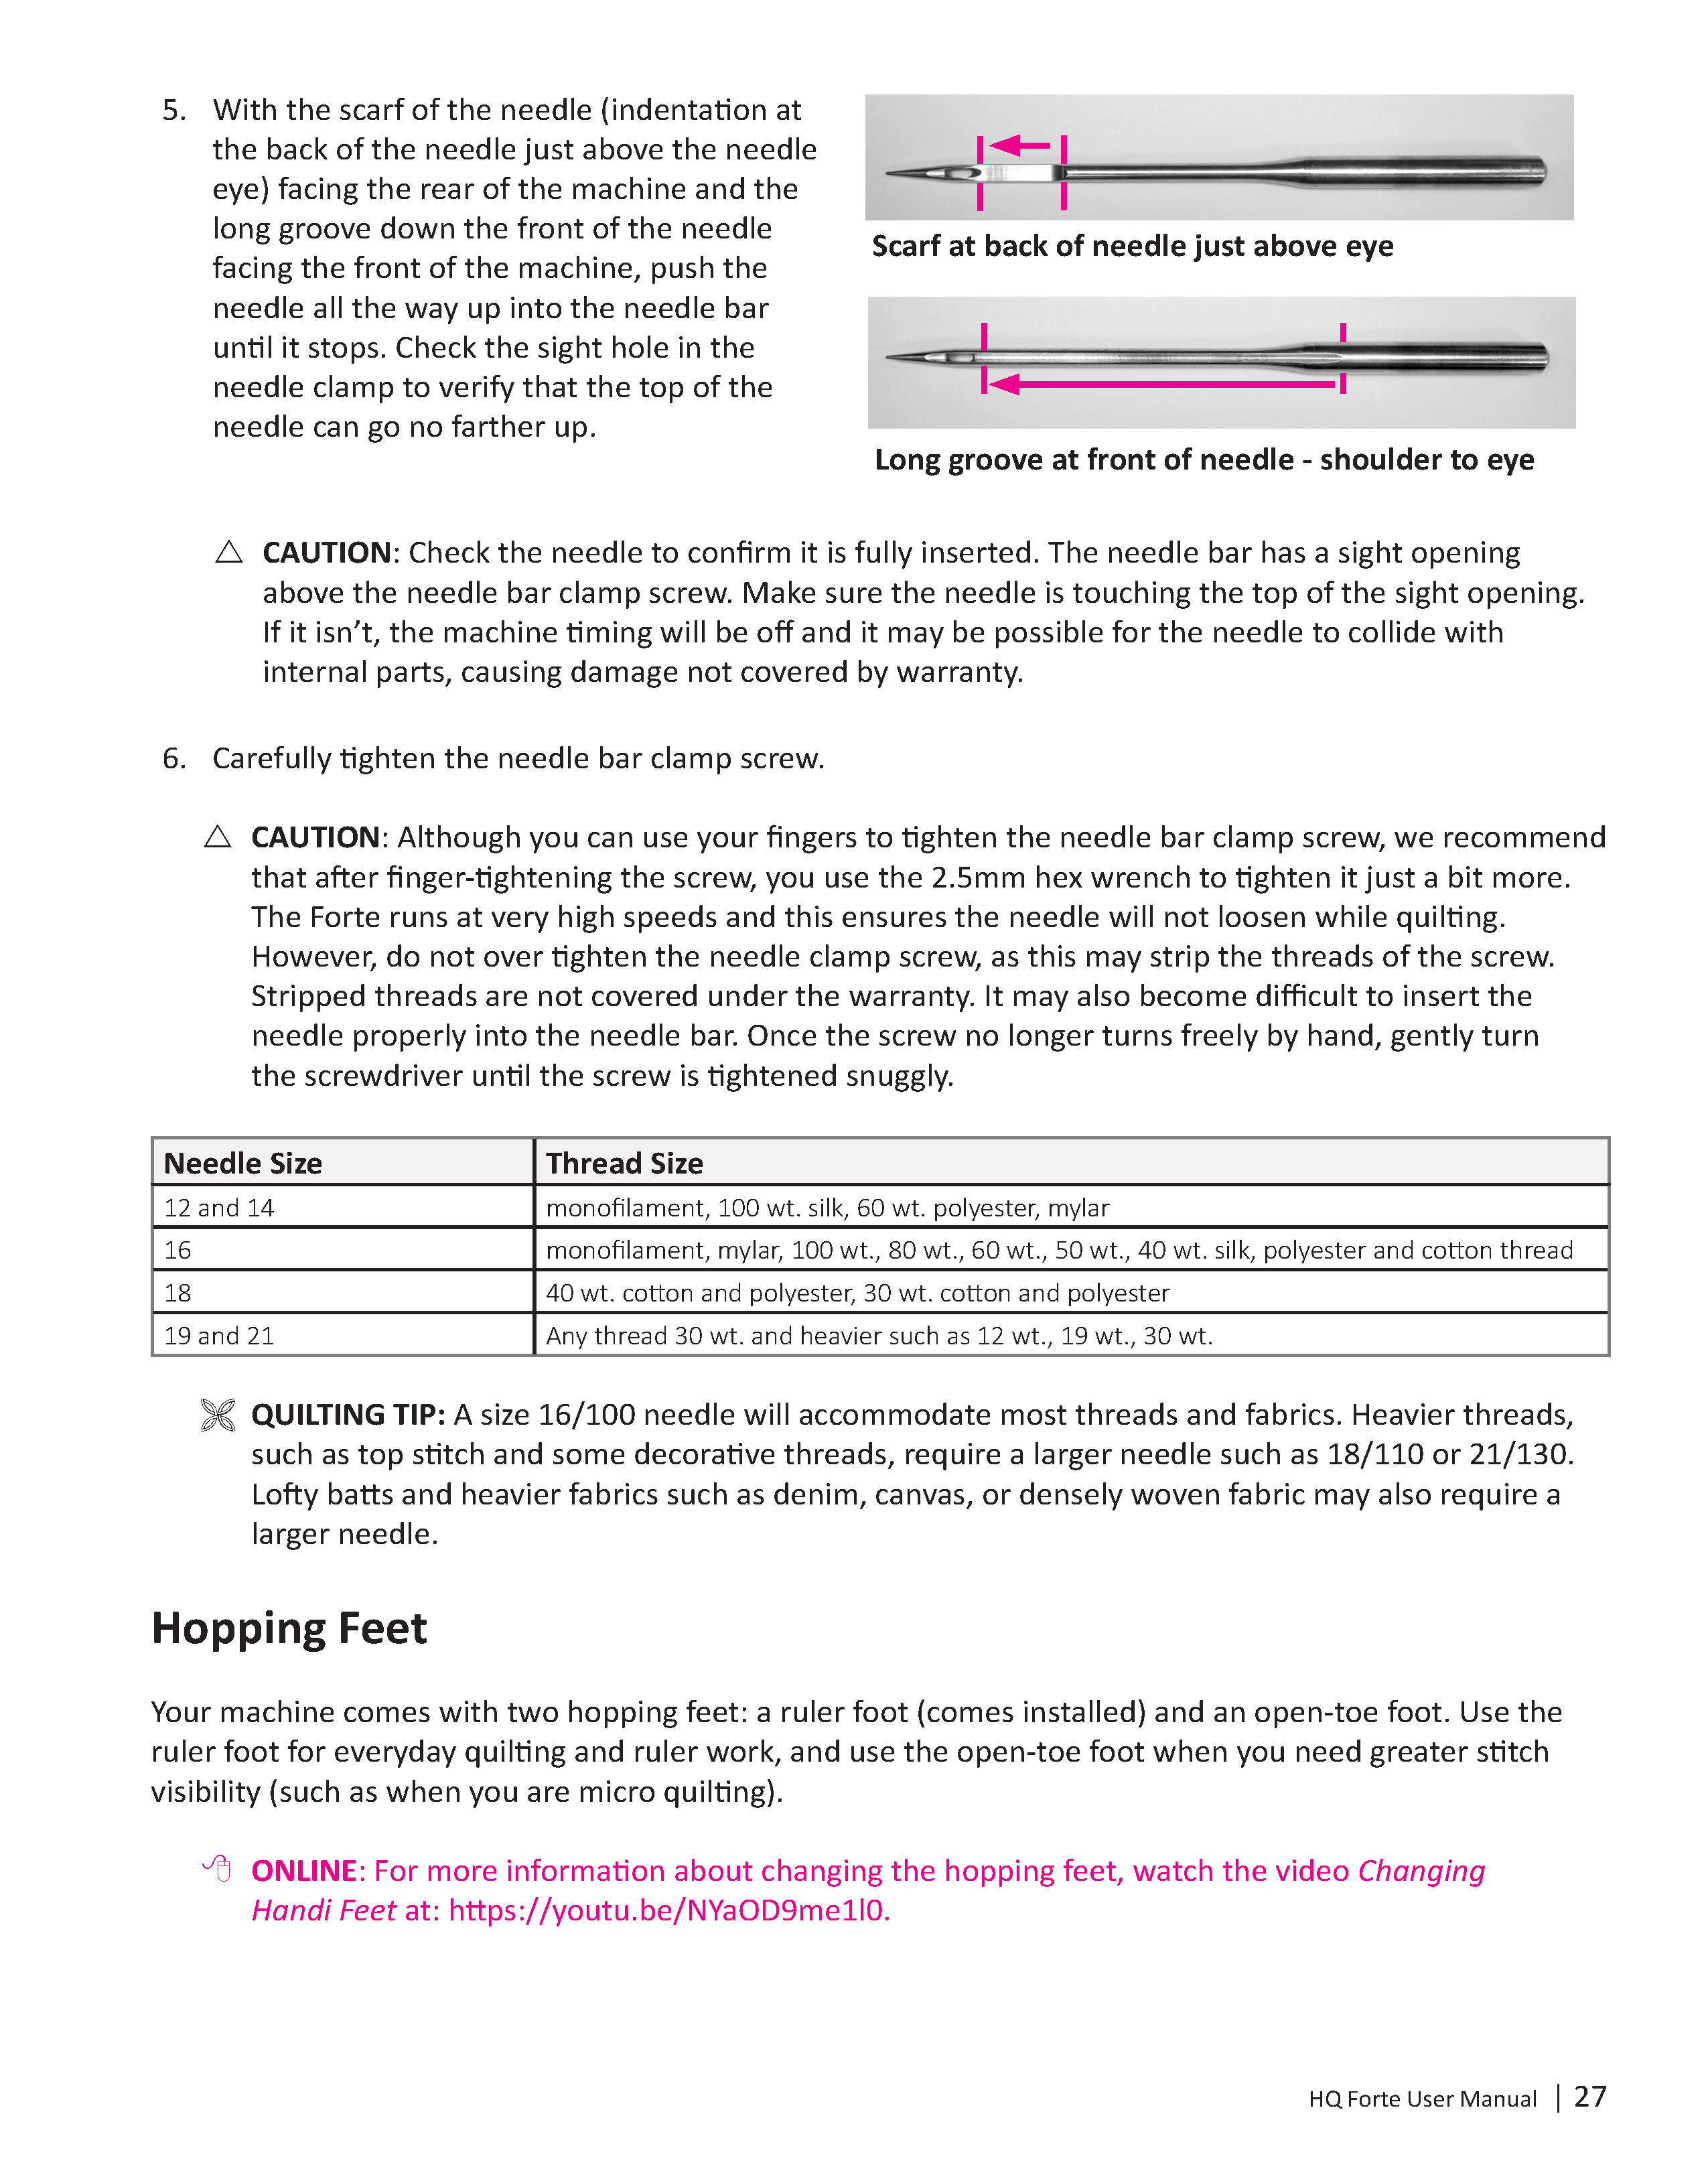 HQ-Forte-User-Manual-ALL-2_Page_28.png